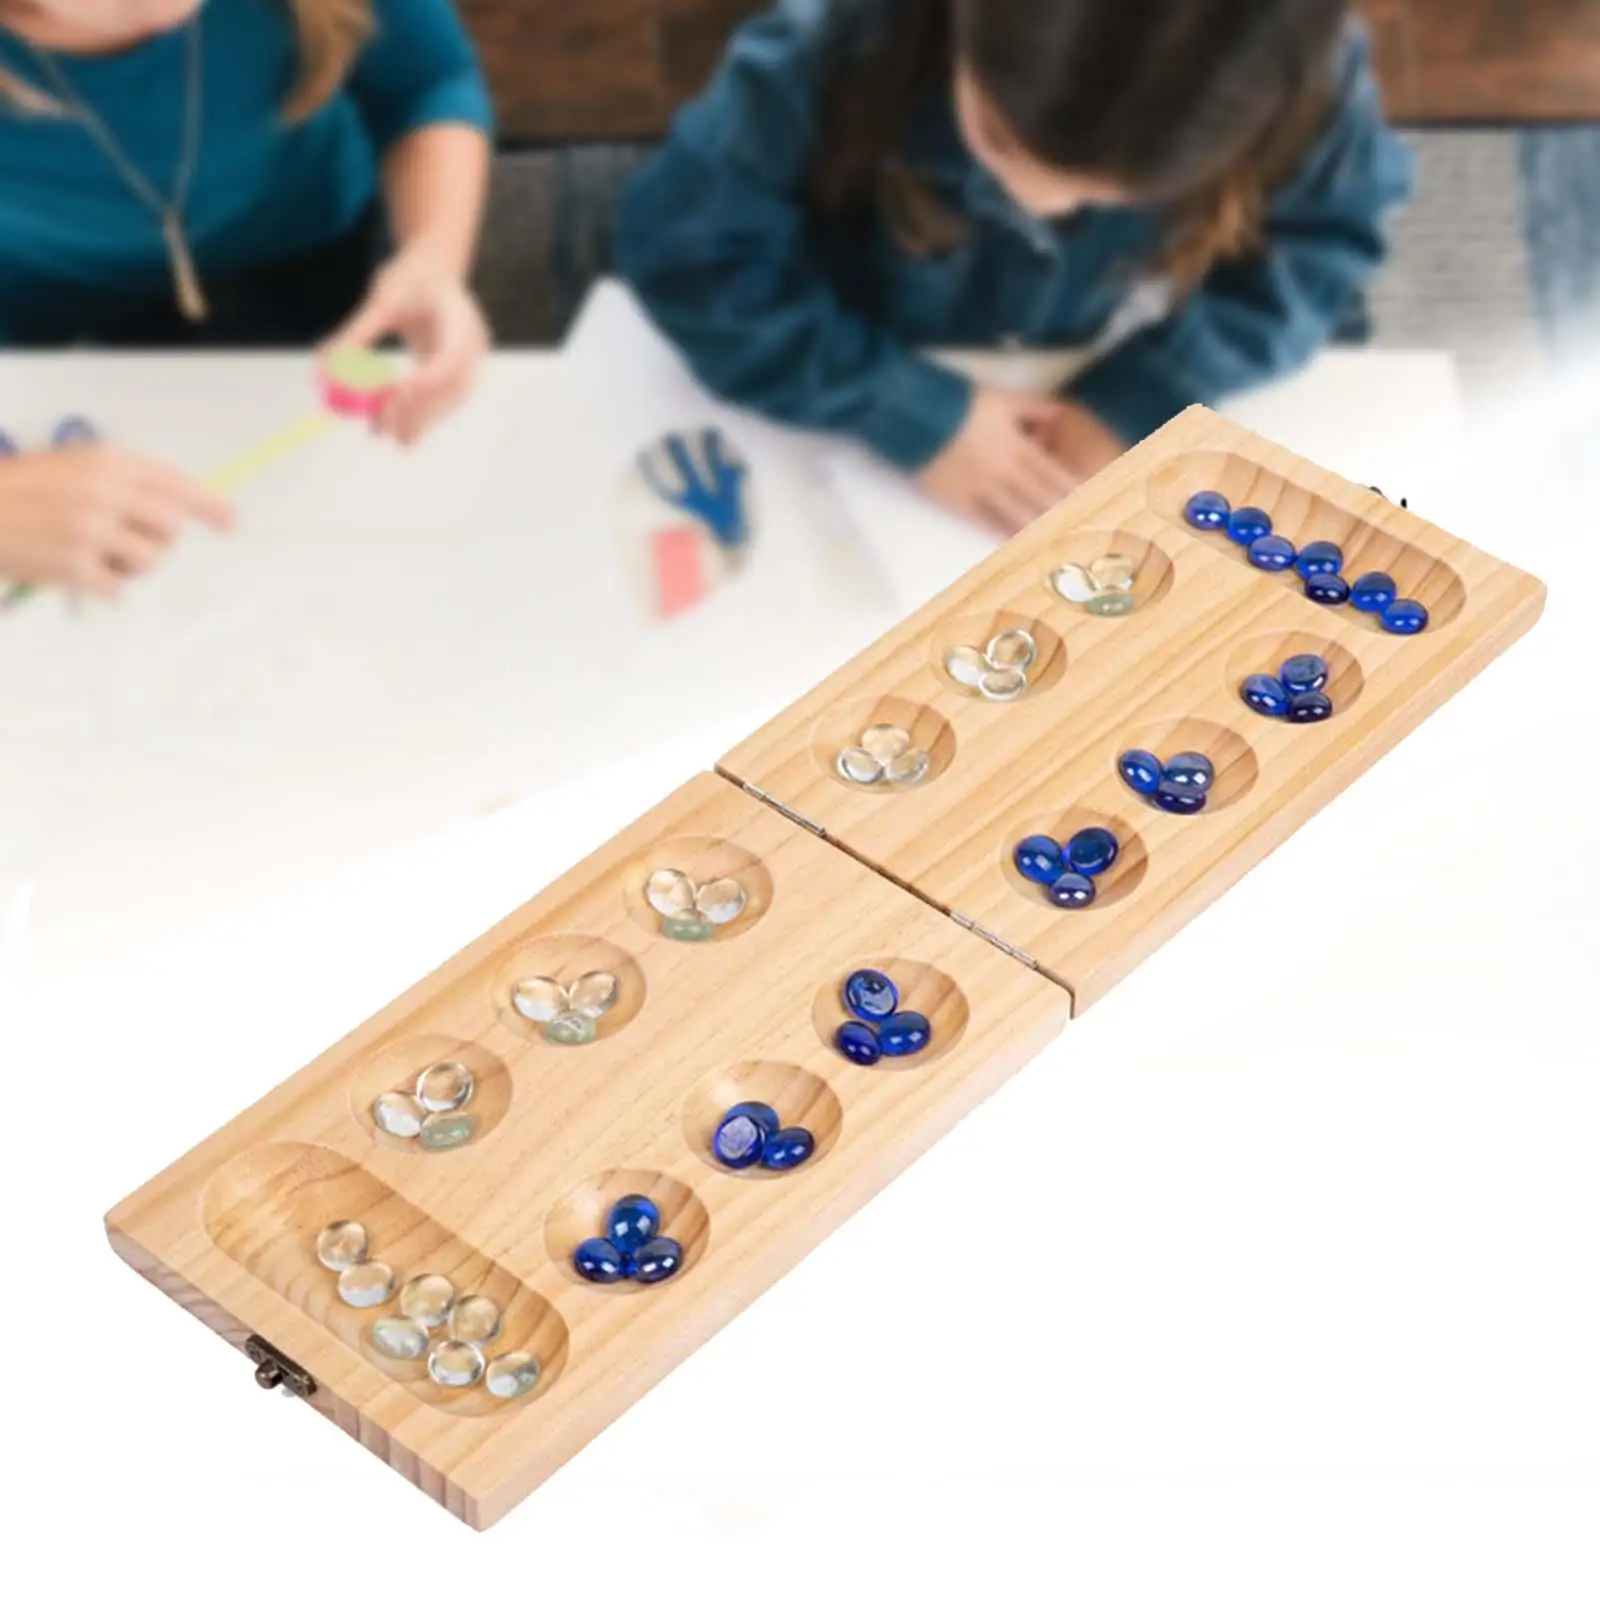 Wooden Mancala Board Game 2 Player Game Set Foldable Mancala Board Game 48 Beads for travel party Teen Adult kids